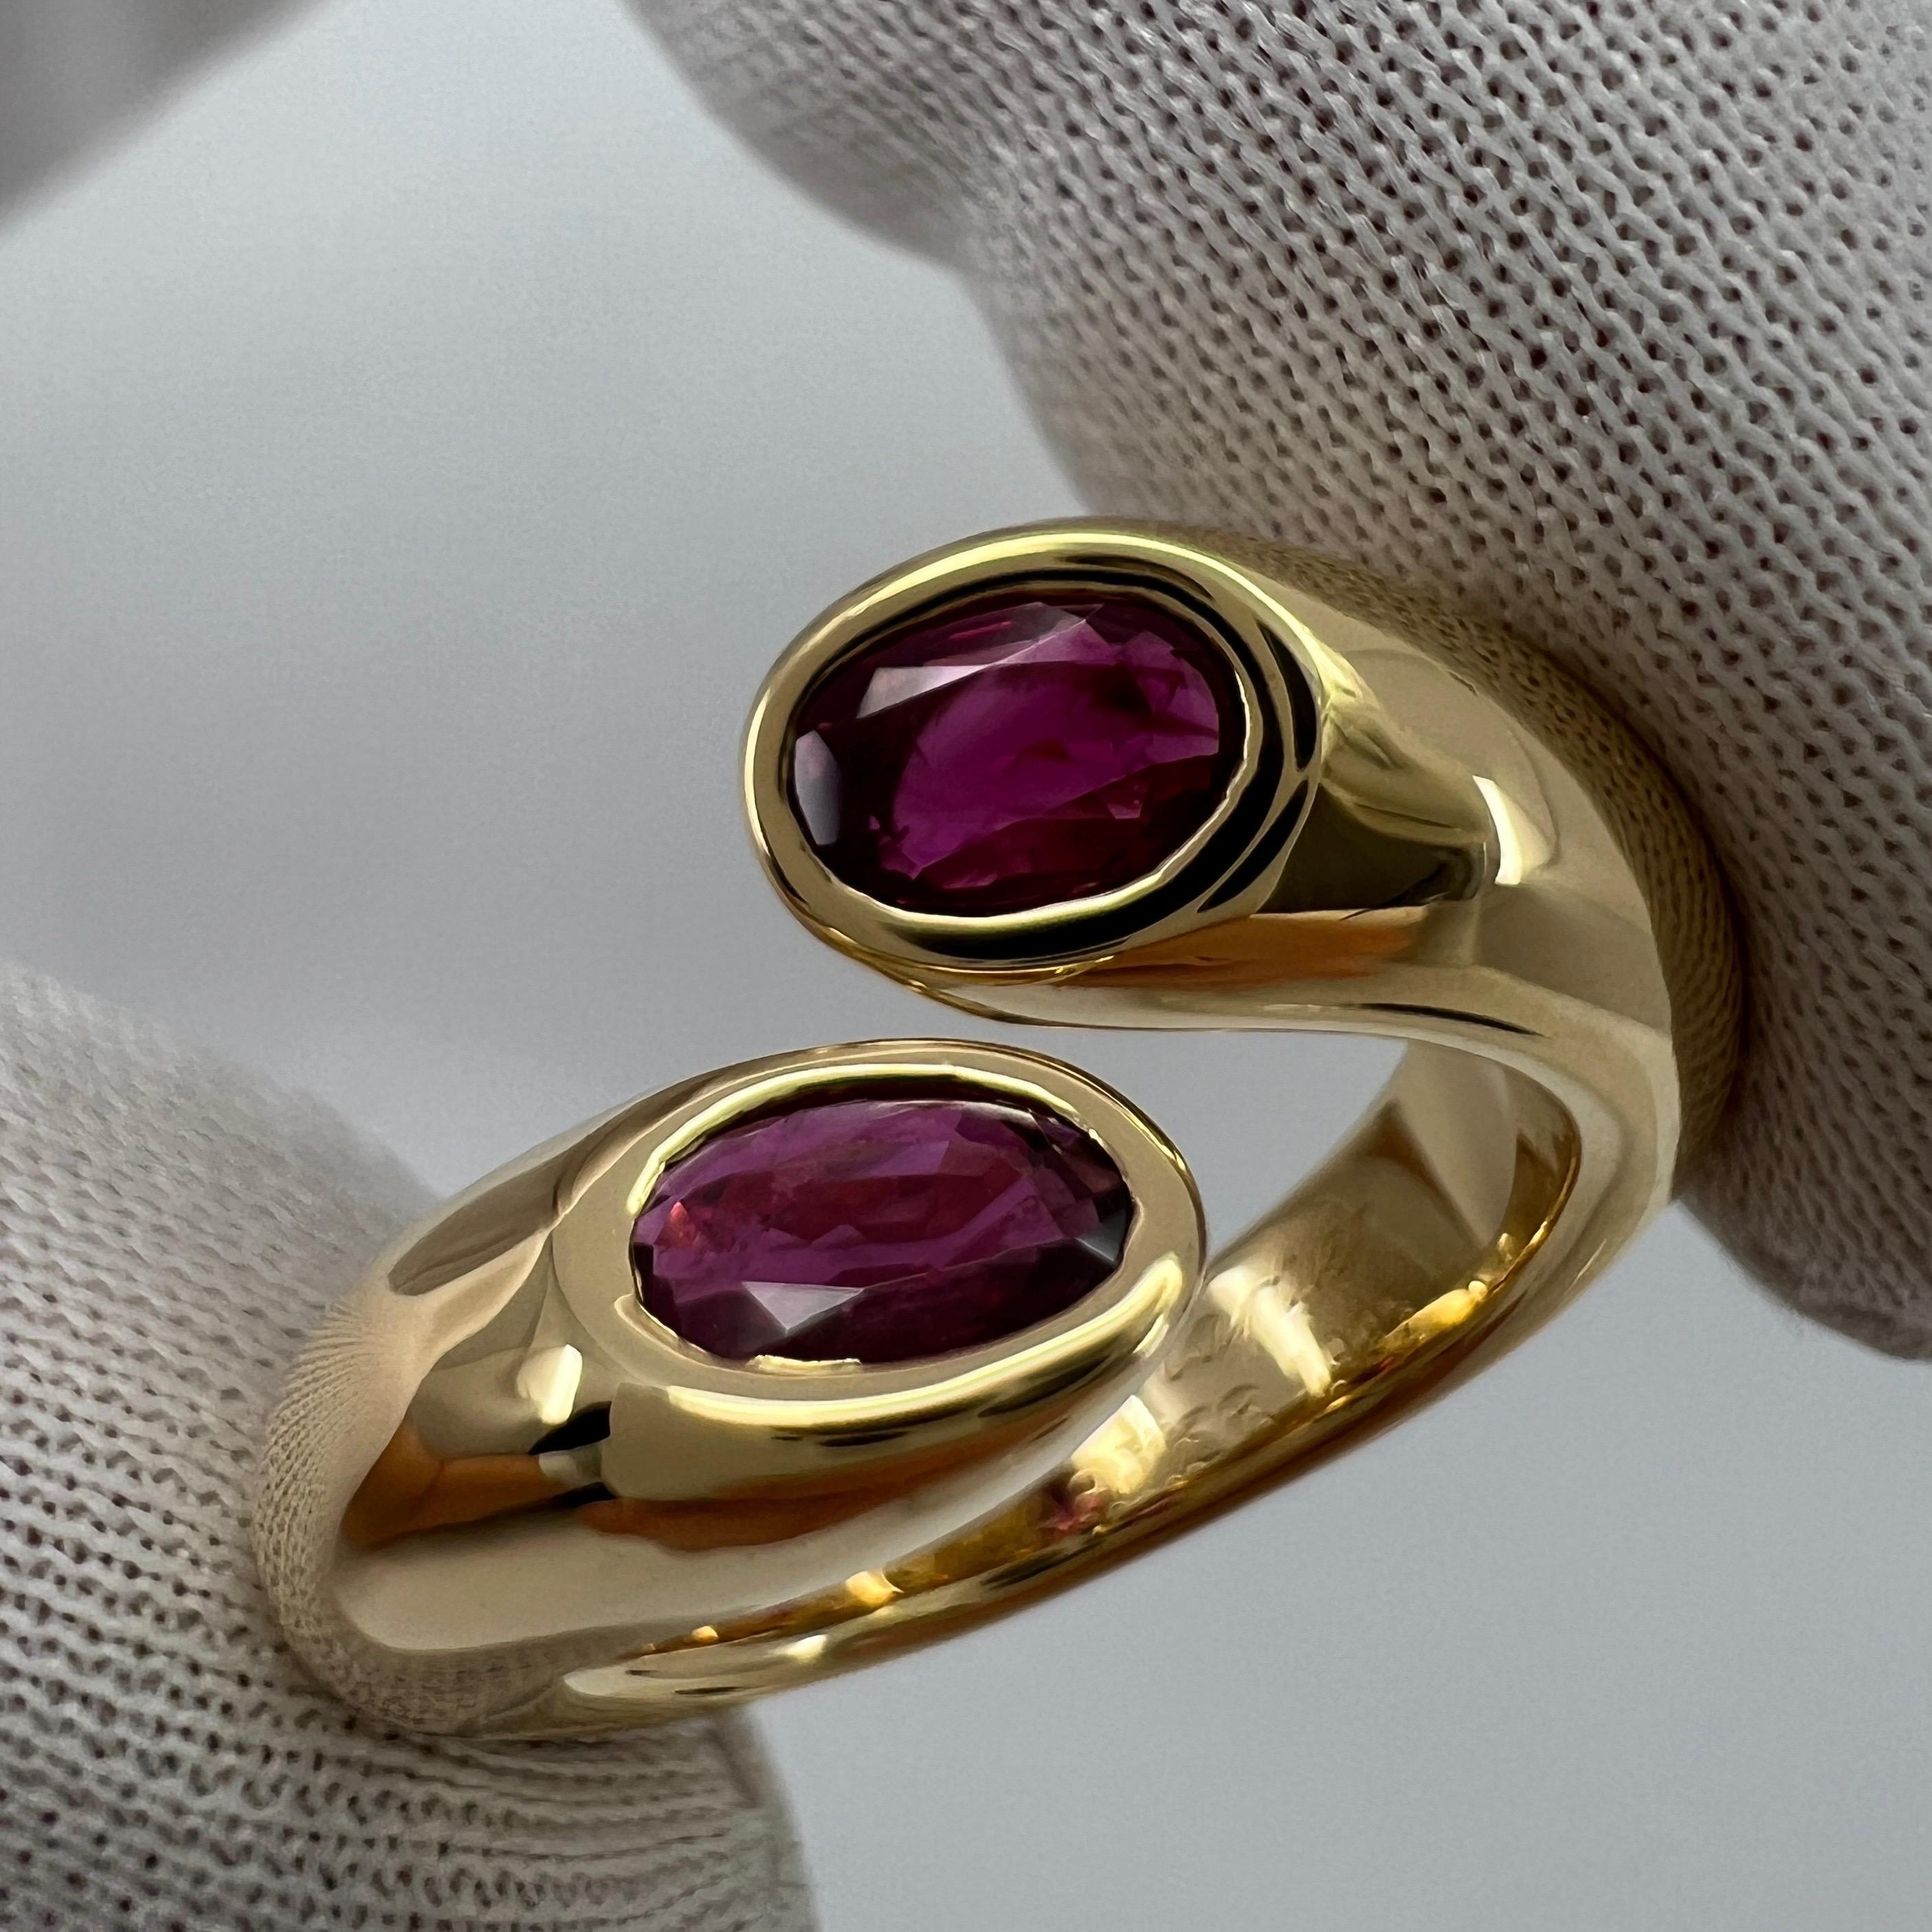 Rare Vintage Cartier Red Ruby Ellipse Oval Cut 18k Gold Bypass Split Ring 6.5 52 1